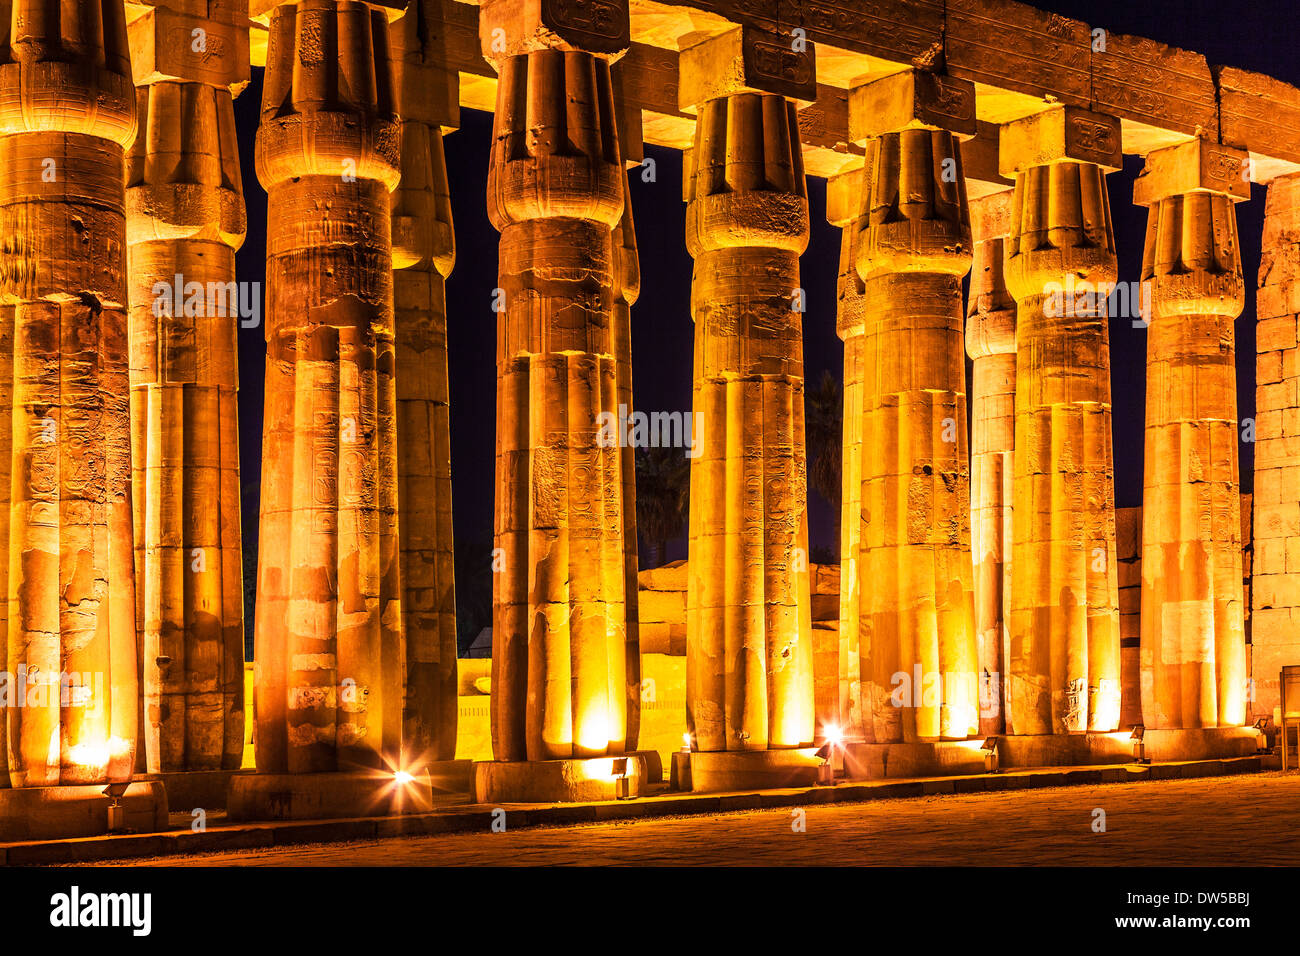 The great hypostyle hall of Amenhotep III at Luxor Temple. Stock Photo